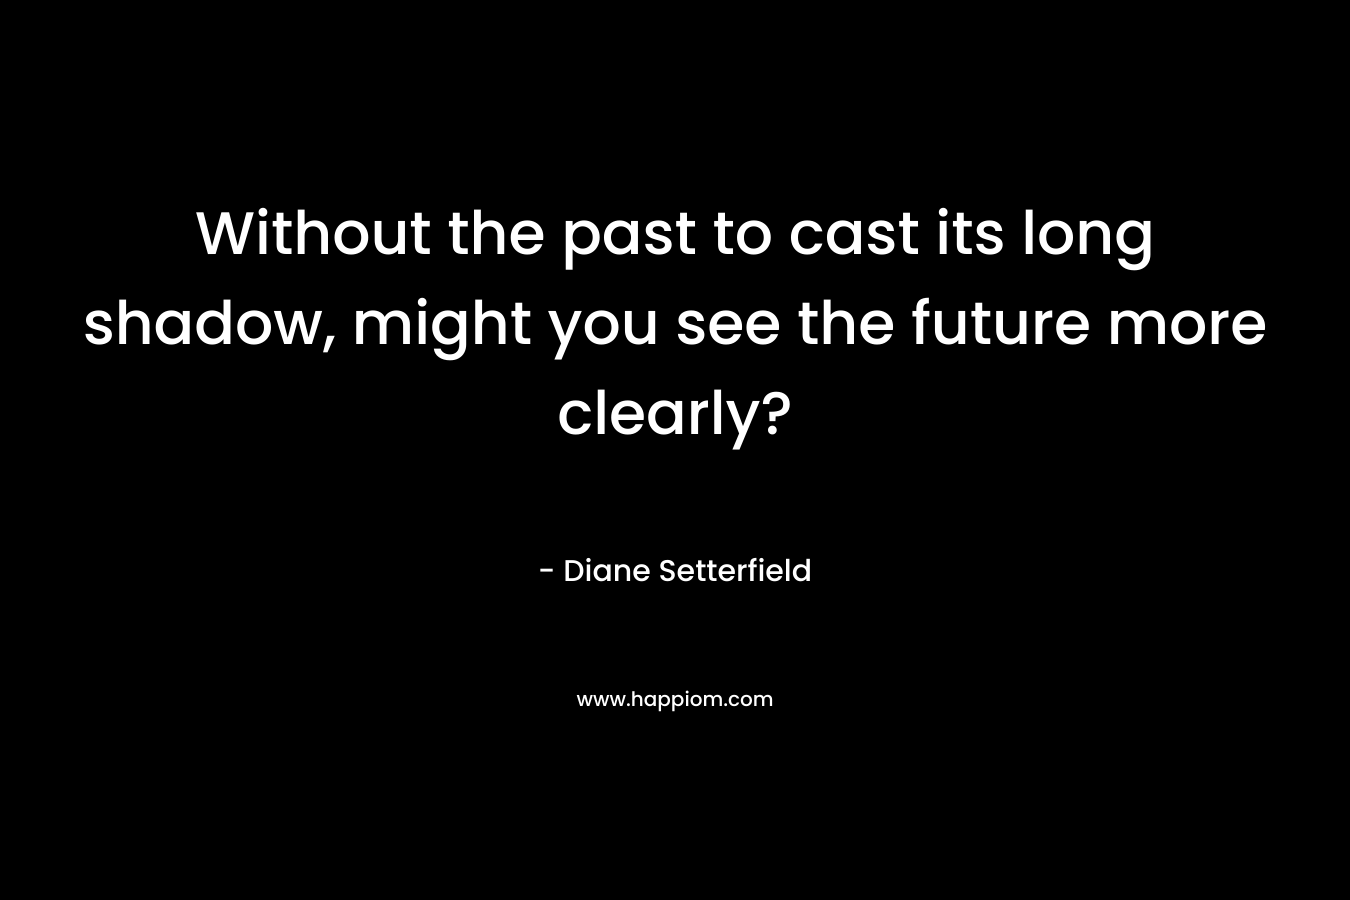 Without the past to cast its long shadow, might you see the future more clearly?